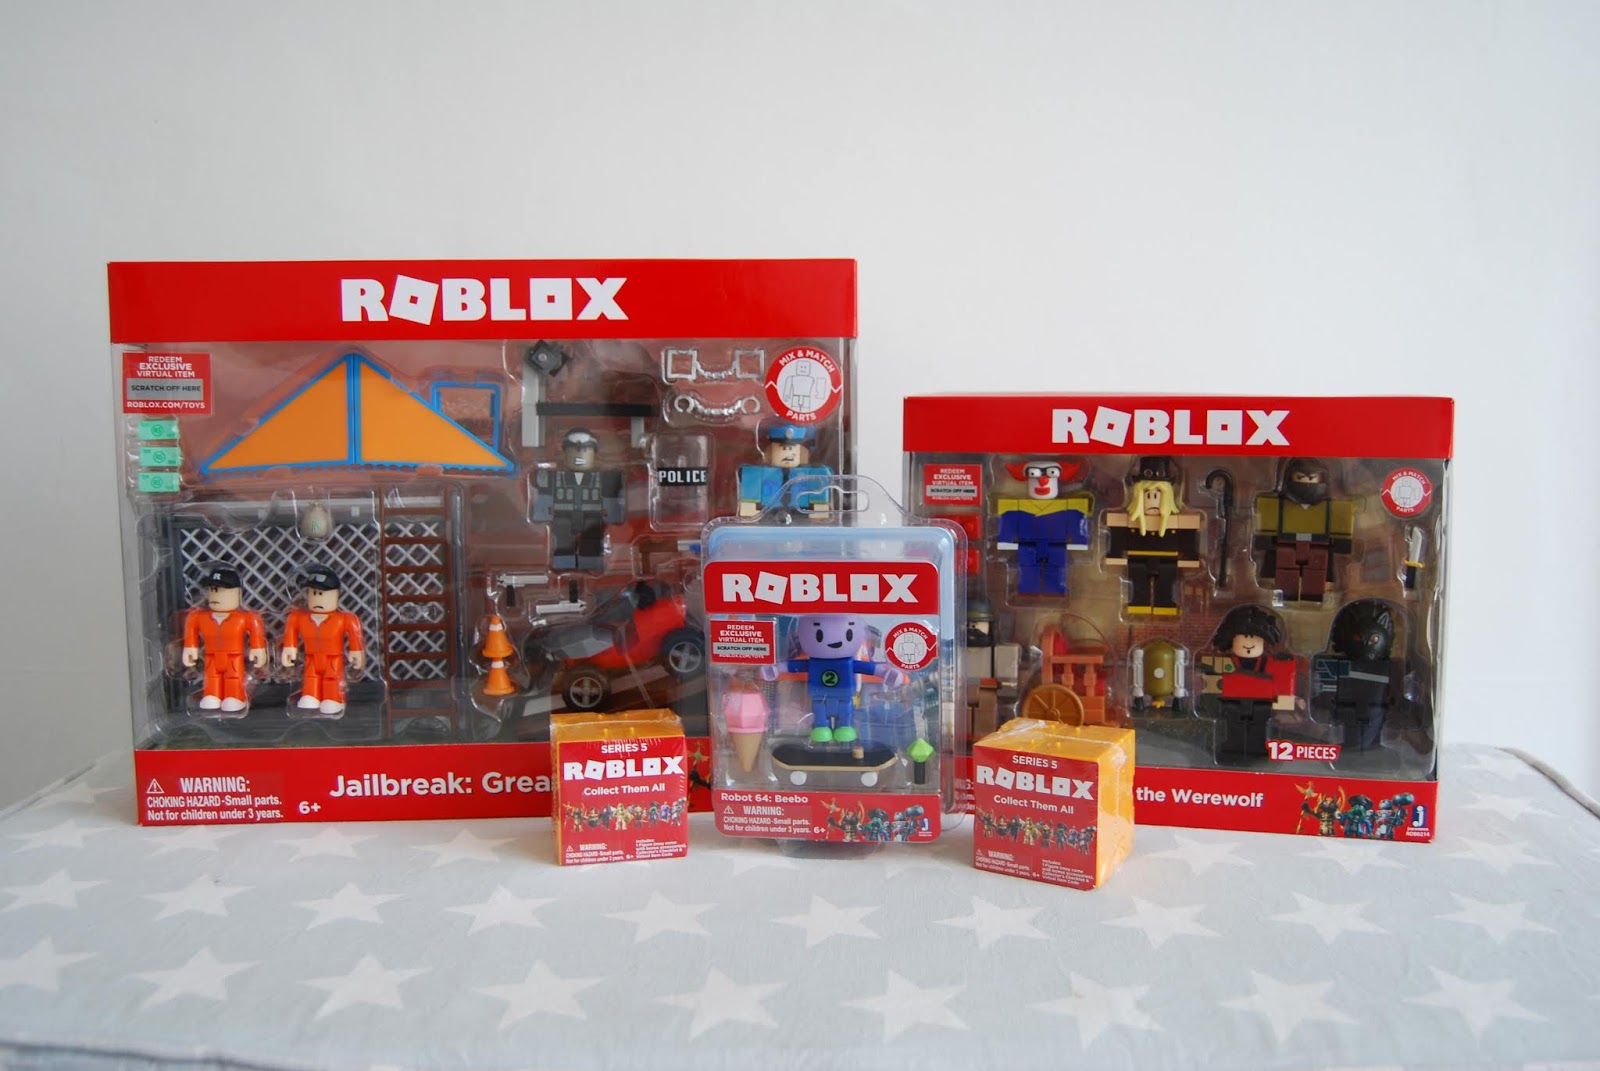 Chic Geek Diary Roblox Series 5 Toys Review Giveaway - lego roblox set